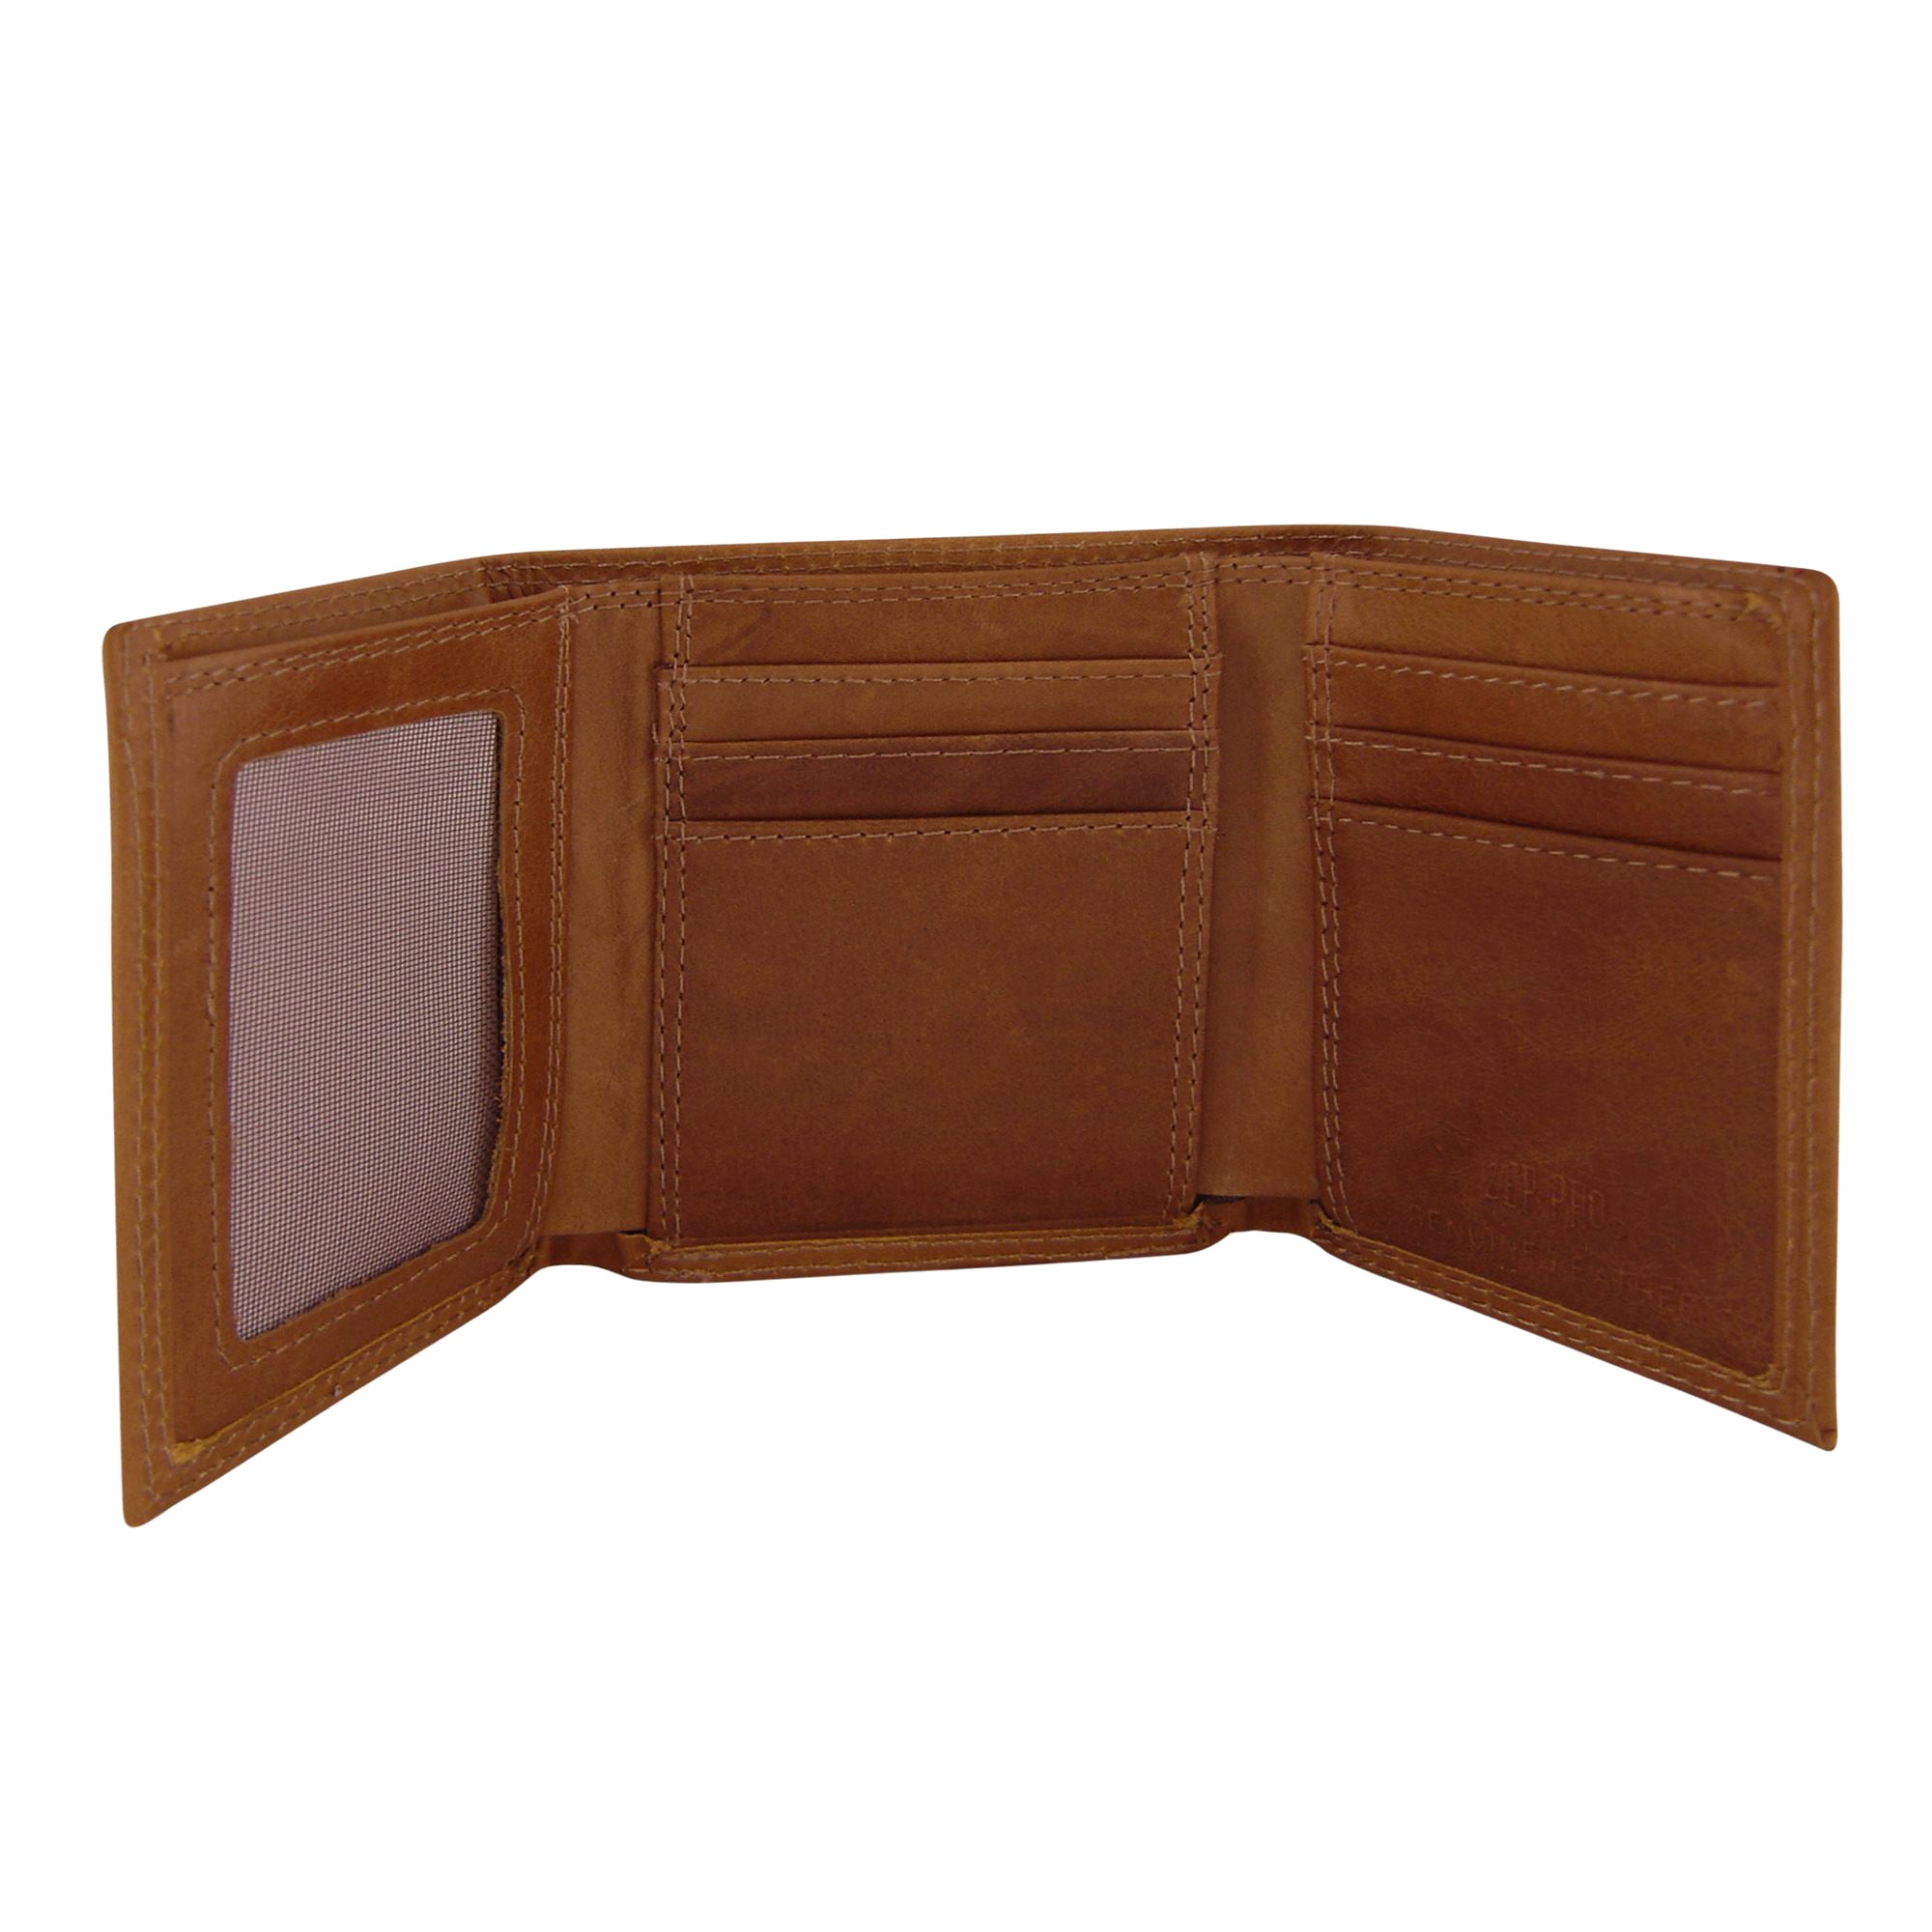 Zep-Pro Marlin Embossed Leather Trifold Wallet